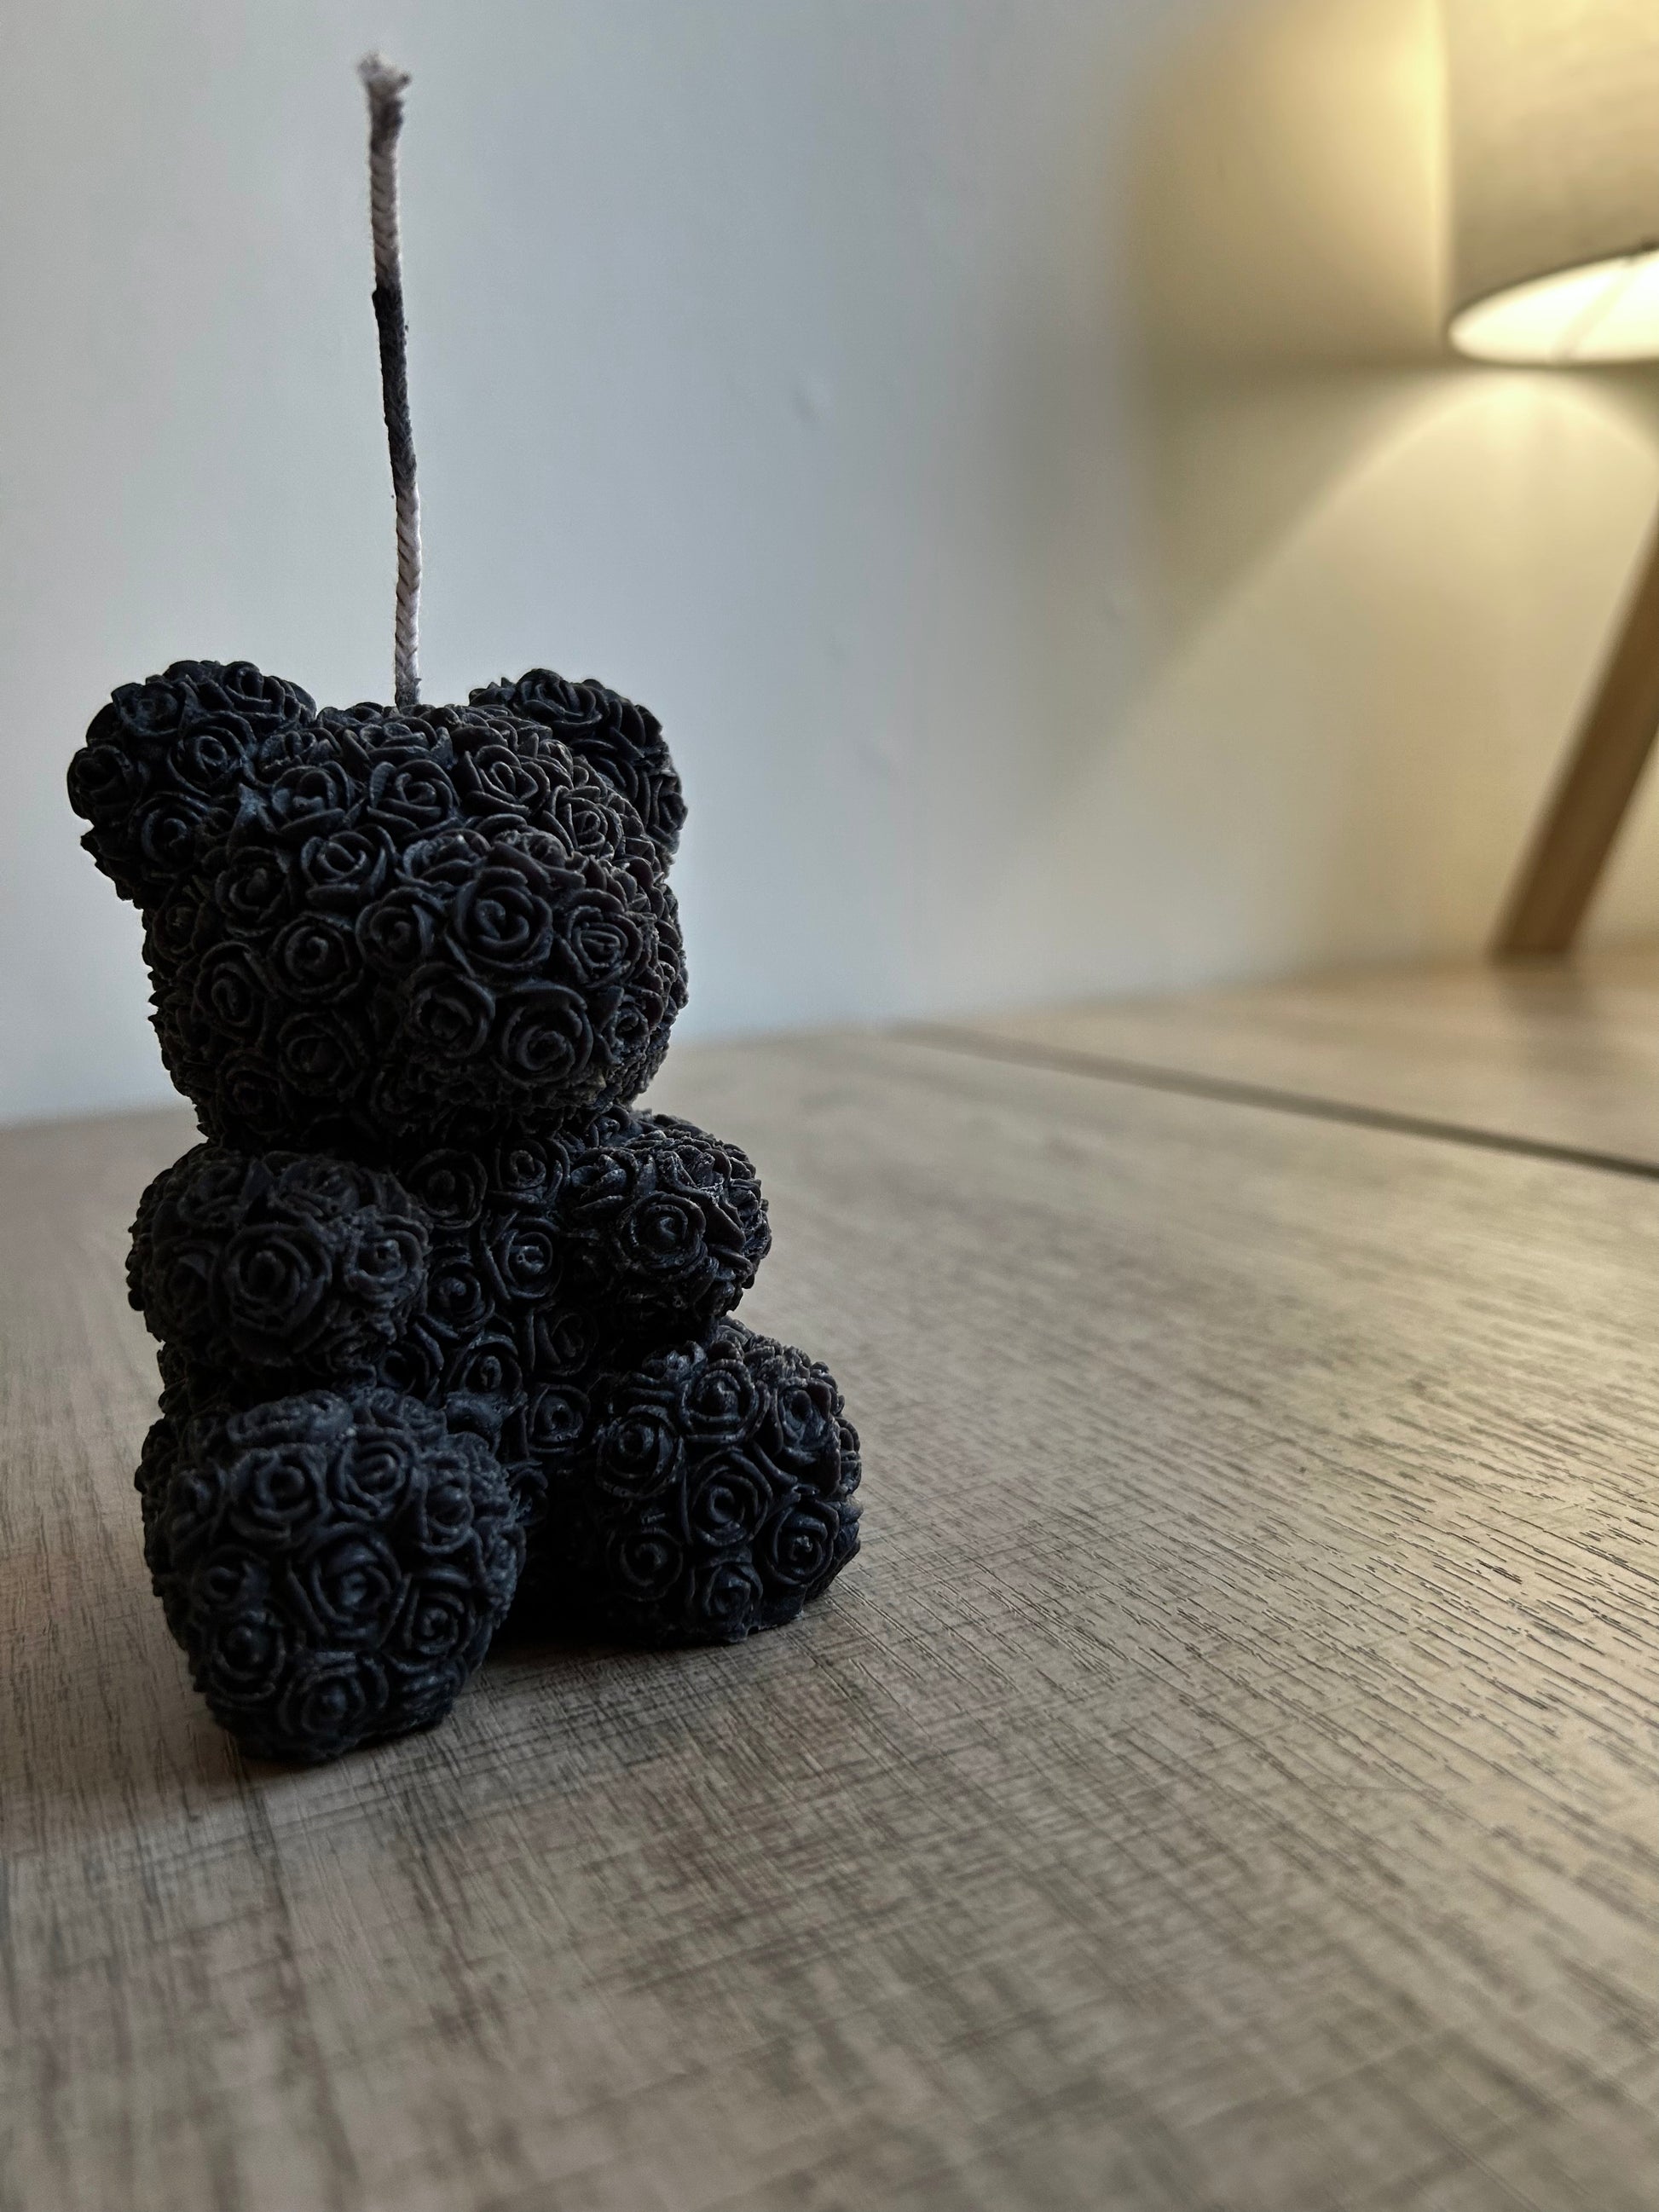 Teddy bear rose candle, right side colour black